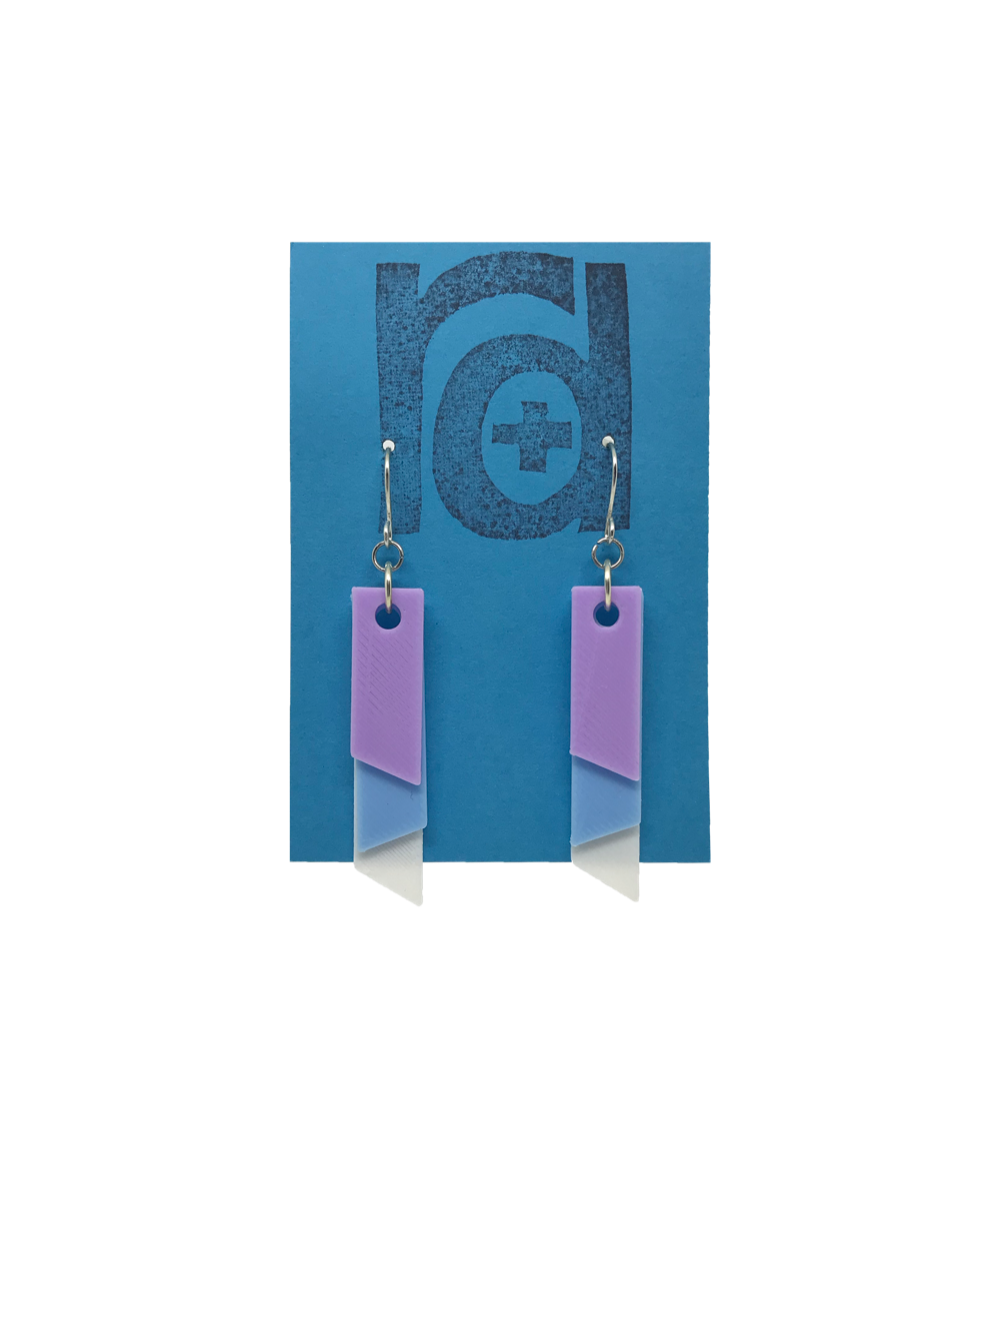 On a bright blue R+D earring card is a set of 3D printed earrings. The  earrings are 3D printed with a plant based filament to make them sustainable as well as affordable. There are three banners hanging down; one is white, one is light blue, and the final is light purple. They are each different lengths so that the colors show. 